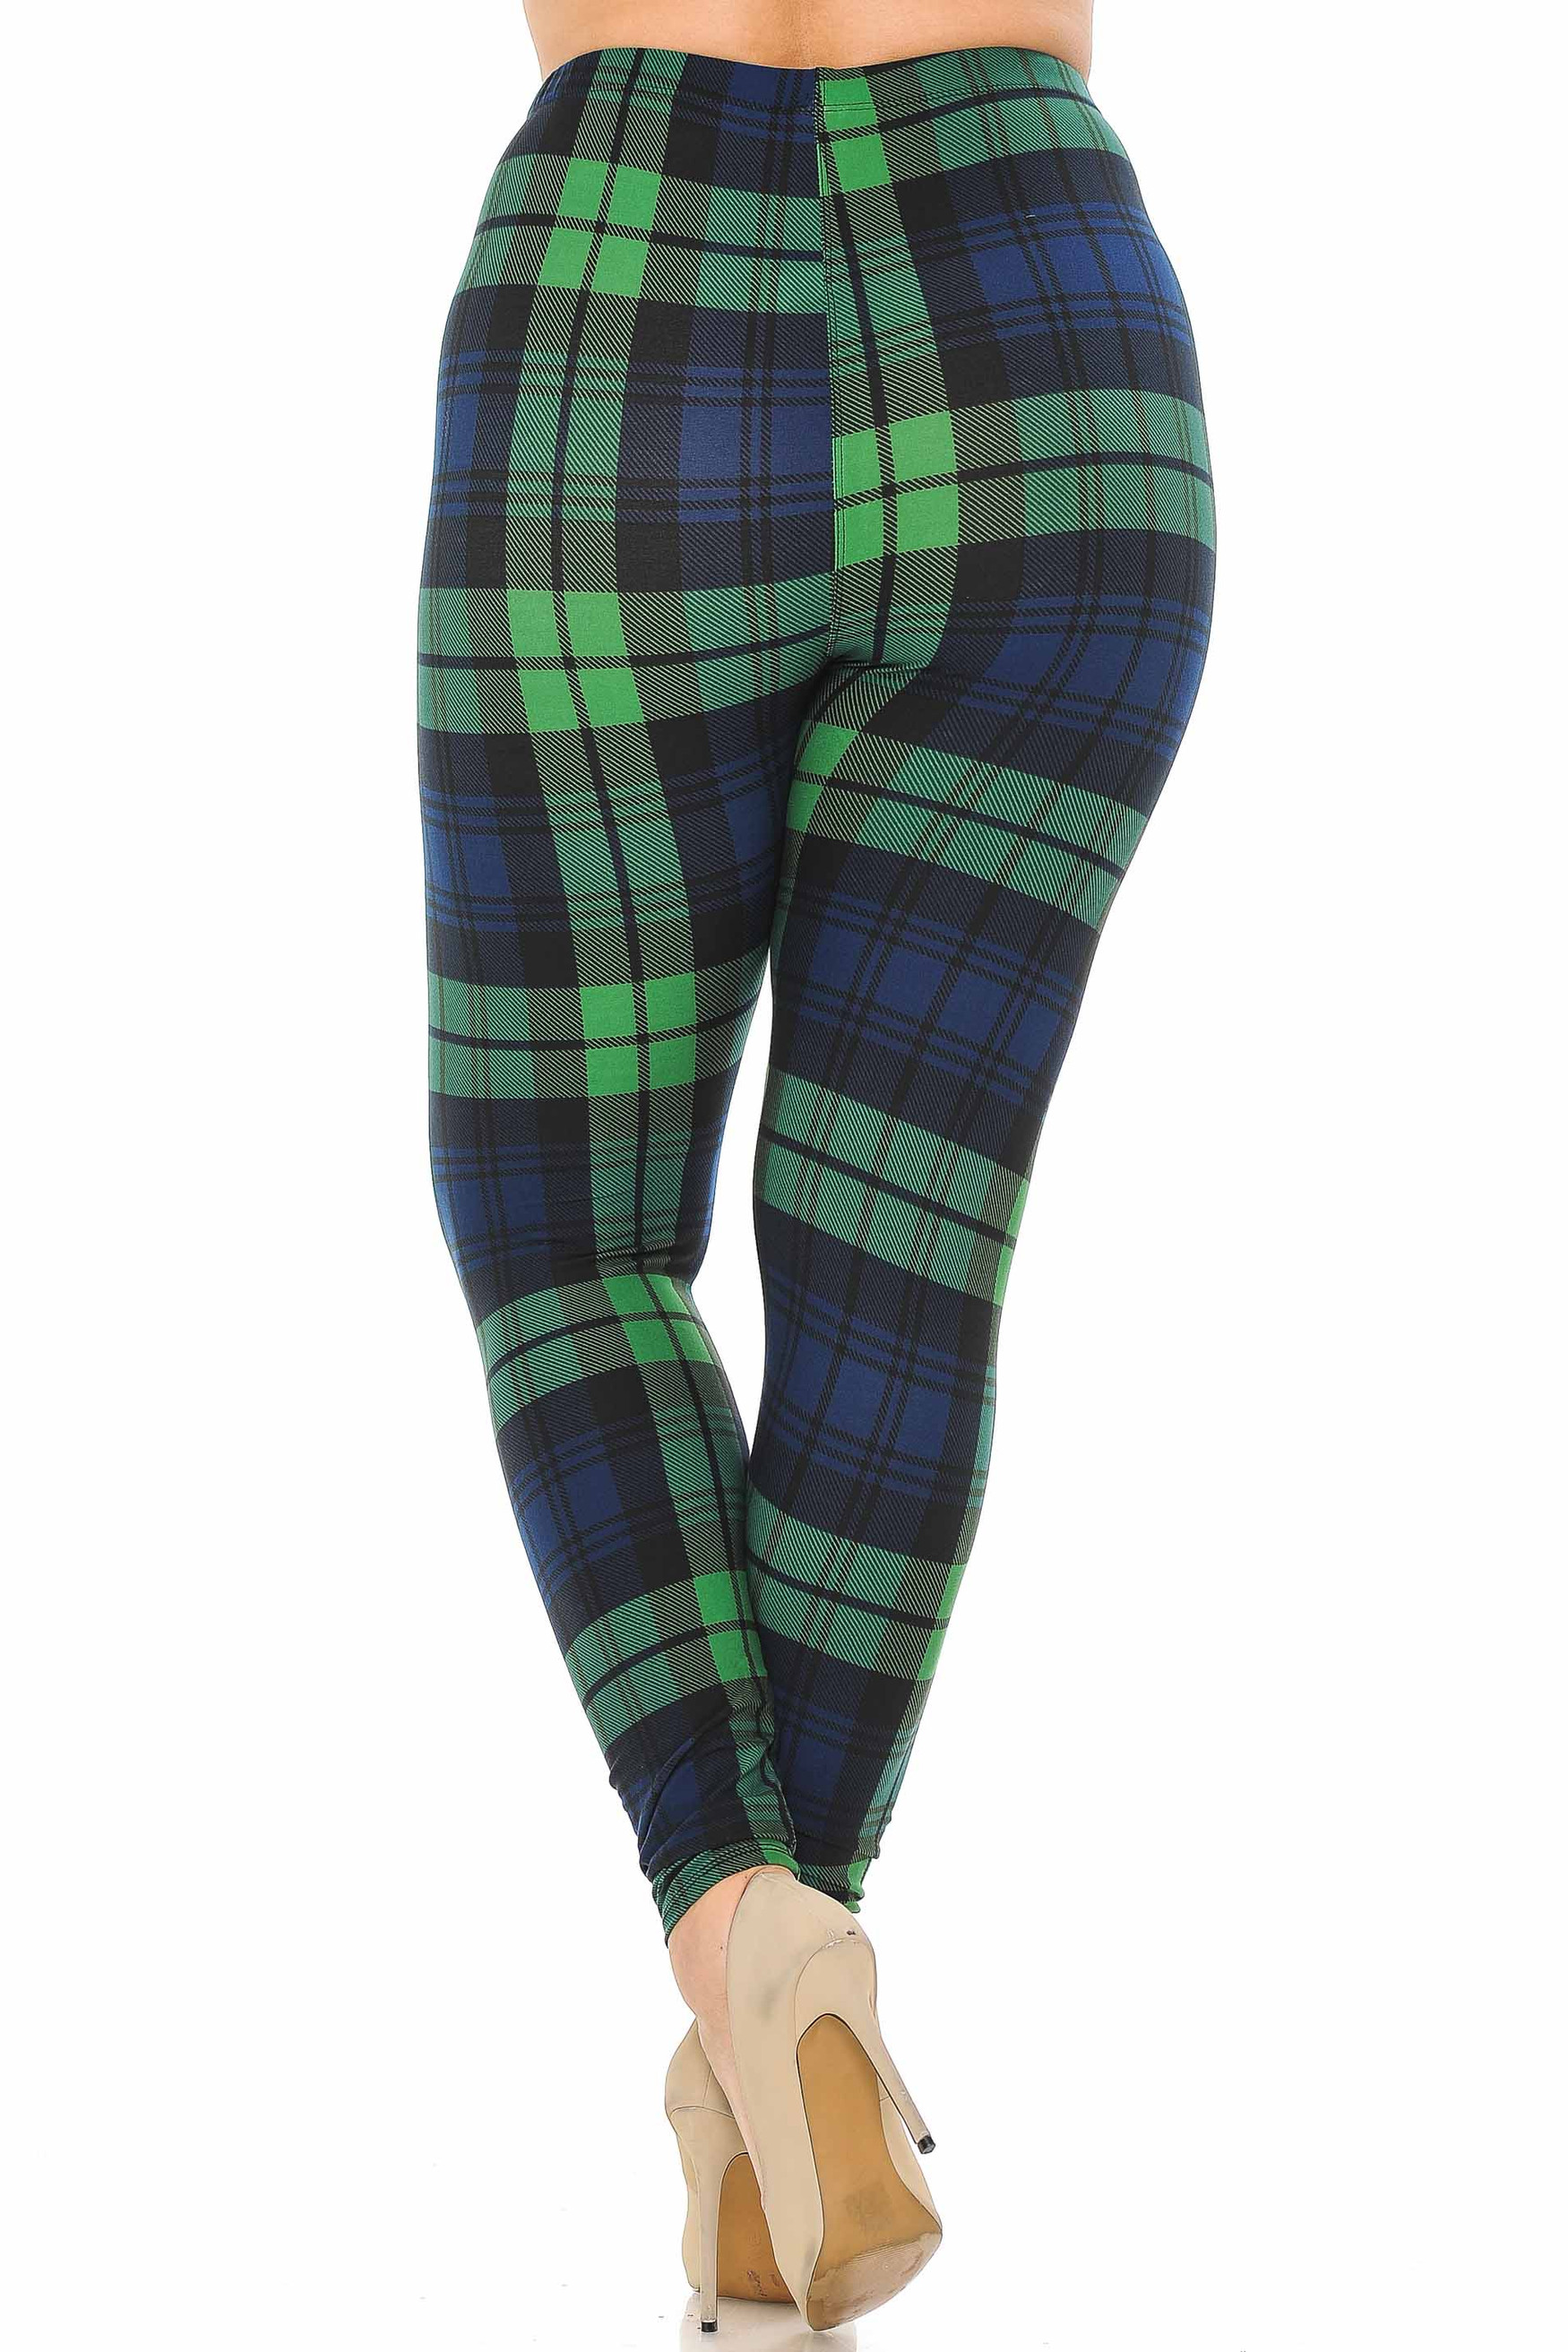 Buttery Soft  Green Plaid Extra Plus Size Leggings - 3X-5X